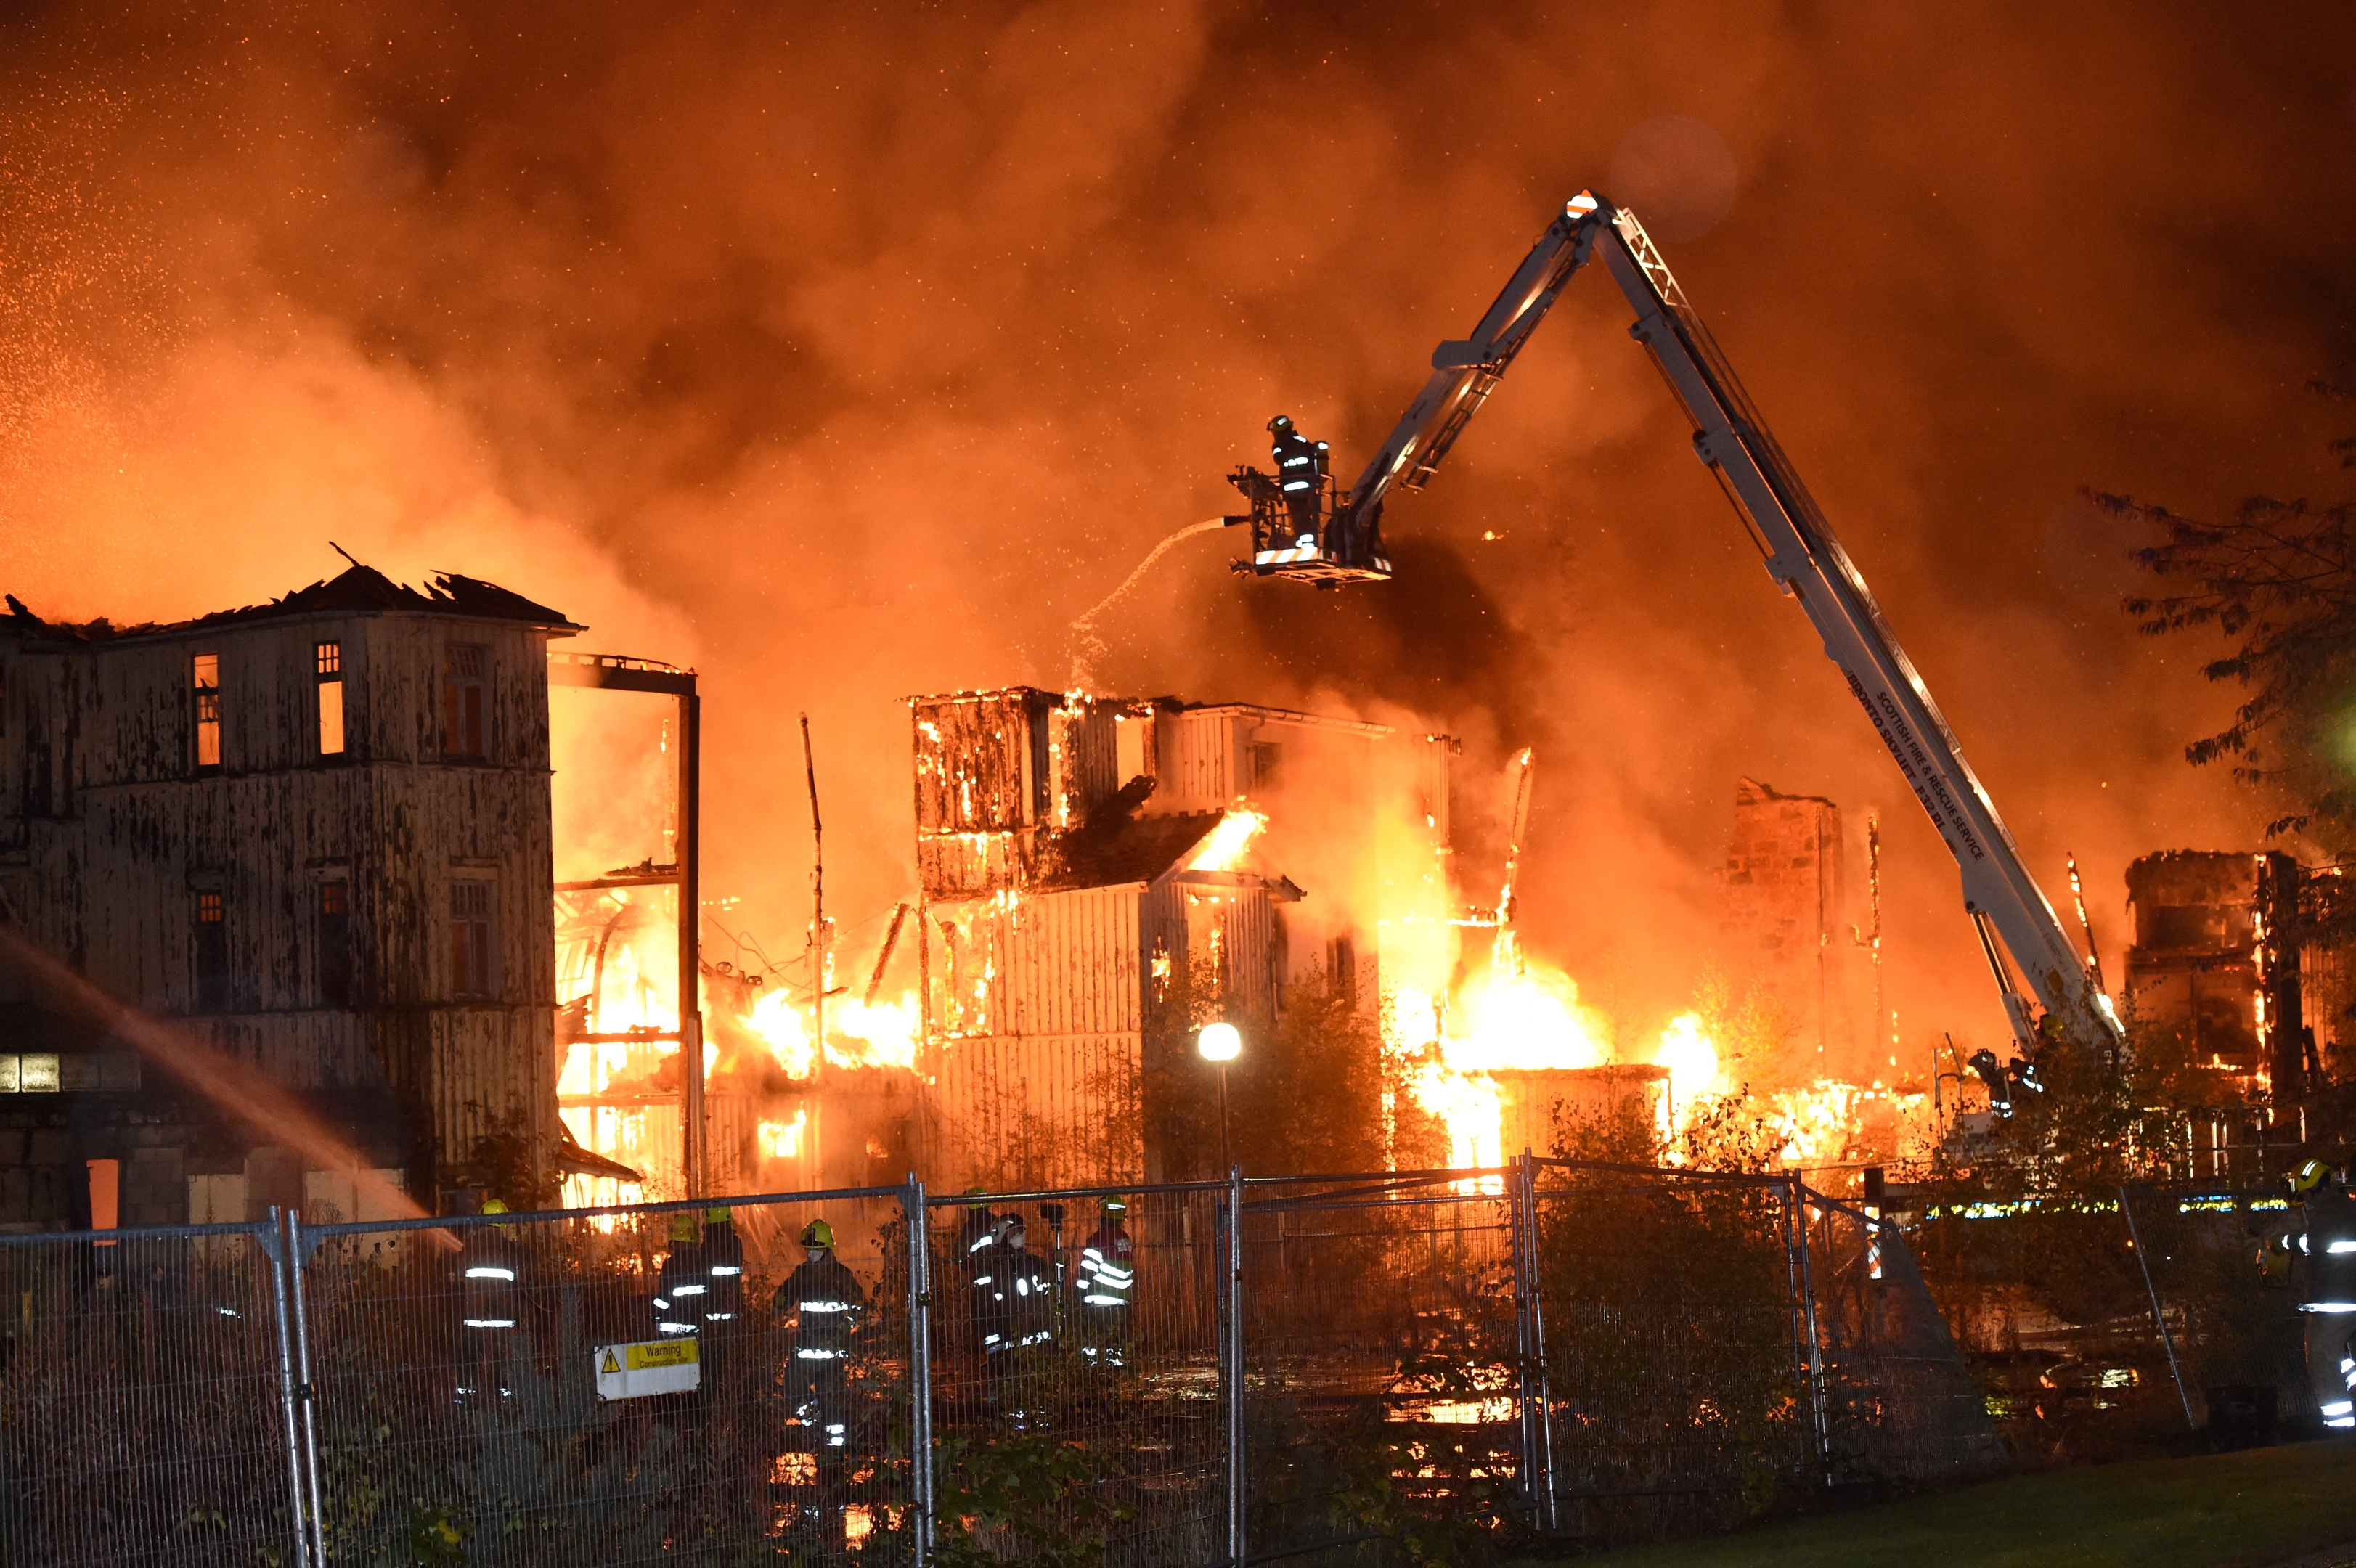 Fire and Rescue services tackle the fire at Glen O'Dee Hospital in Banchory, October 2016.